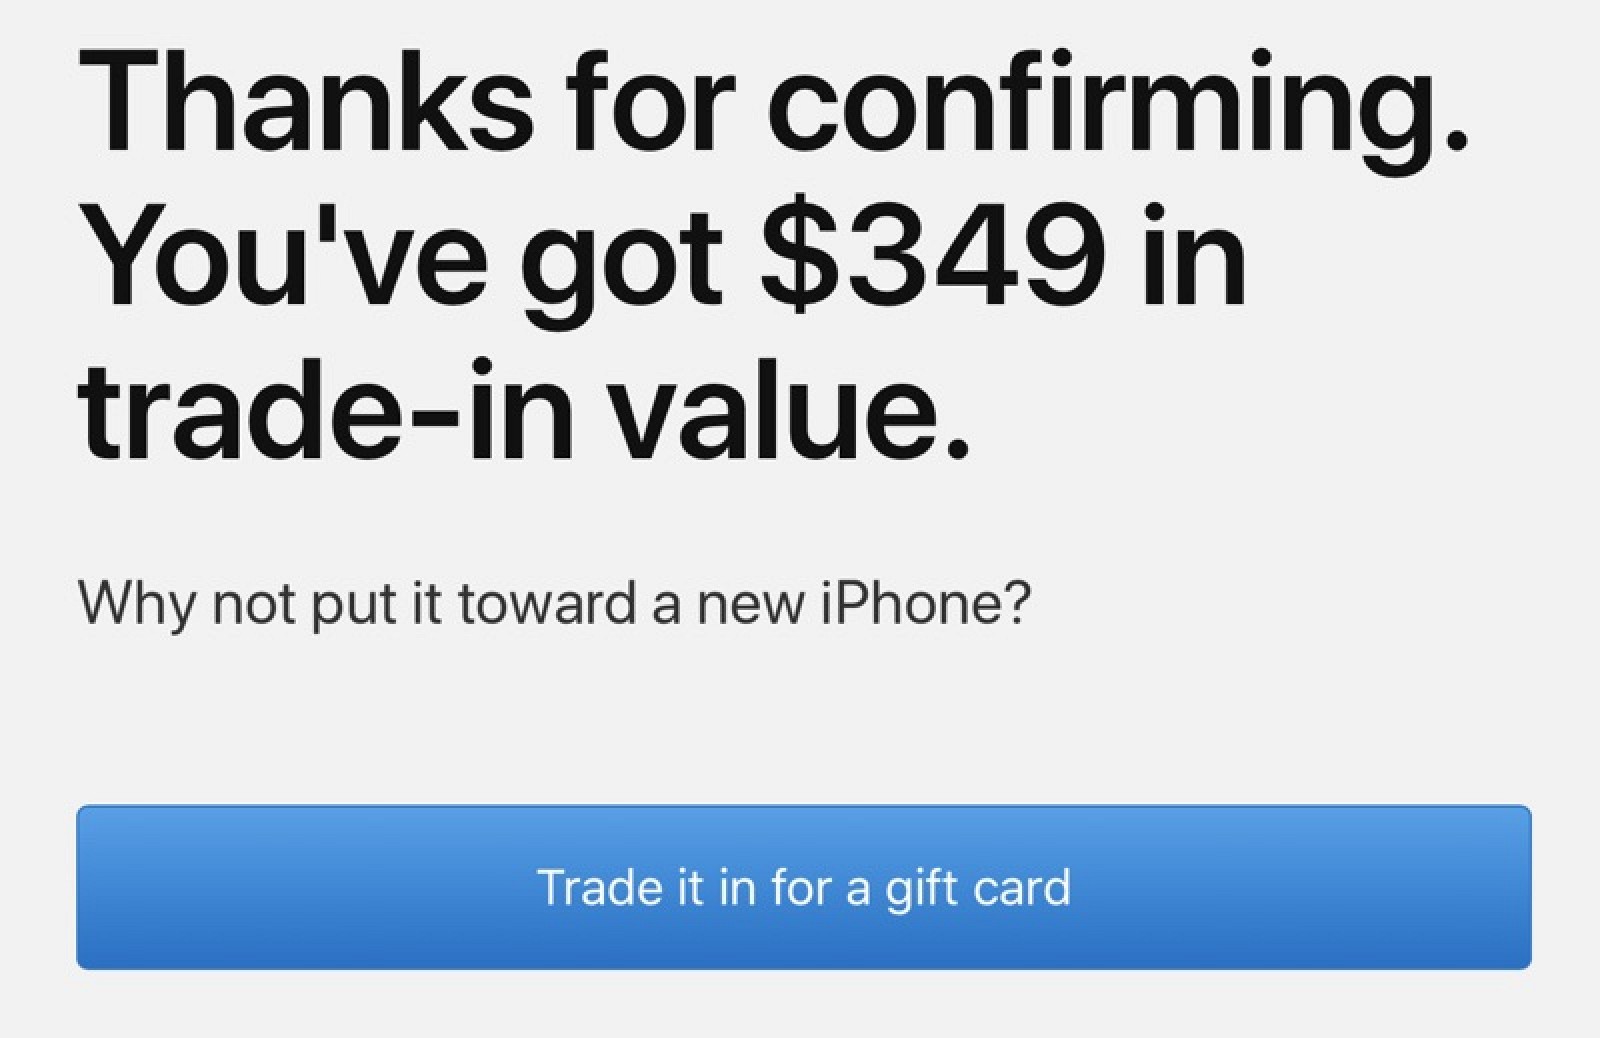 Apple Lowers Maximum iPhone Trade-In Values, Best Deals Now Limited to Trade-Ins with Purchase - Mac Rumors thumbnail